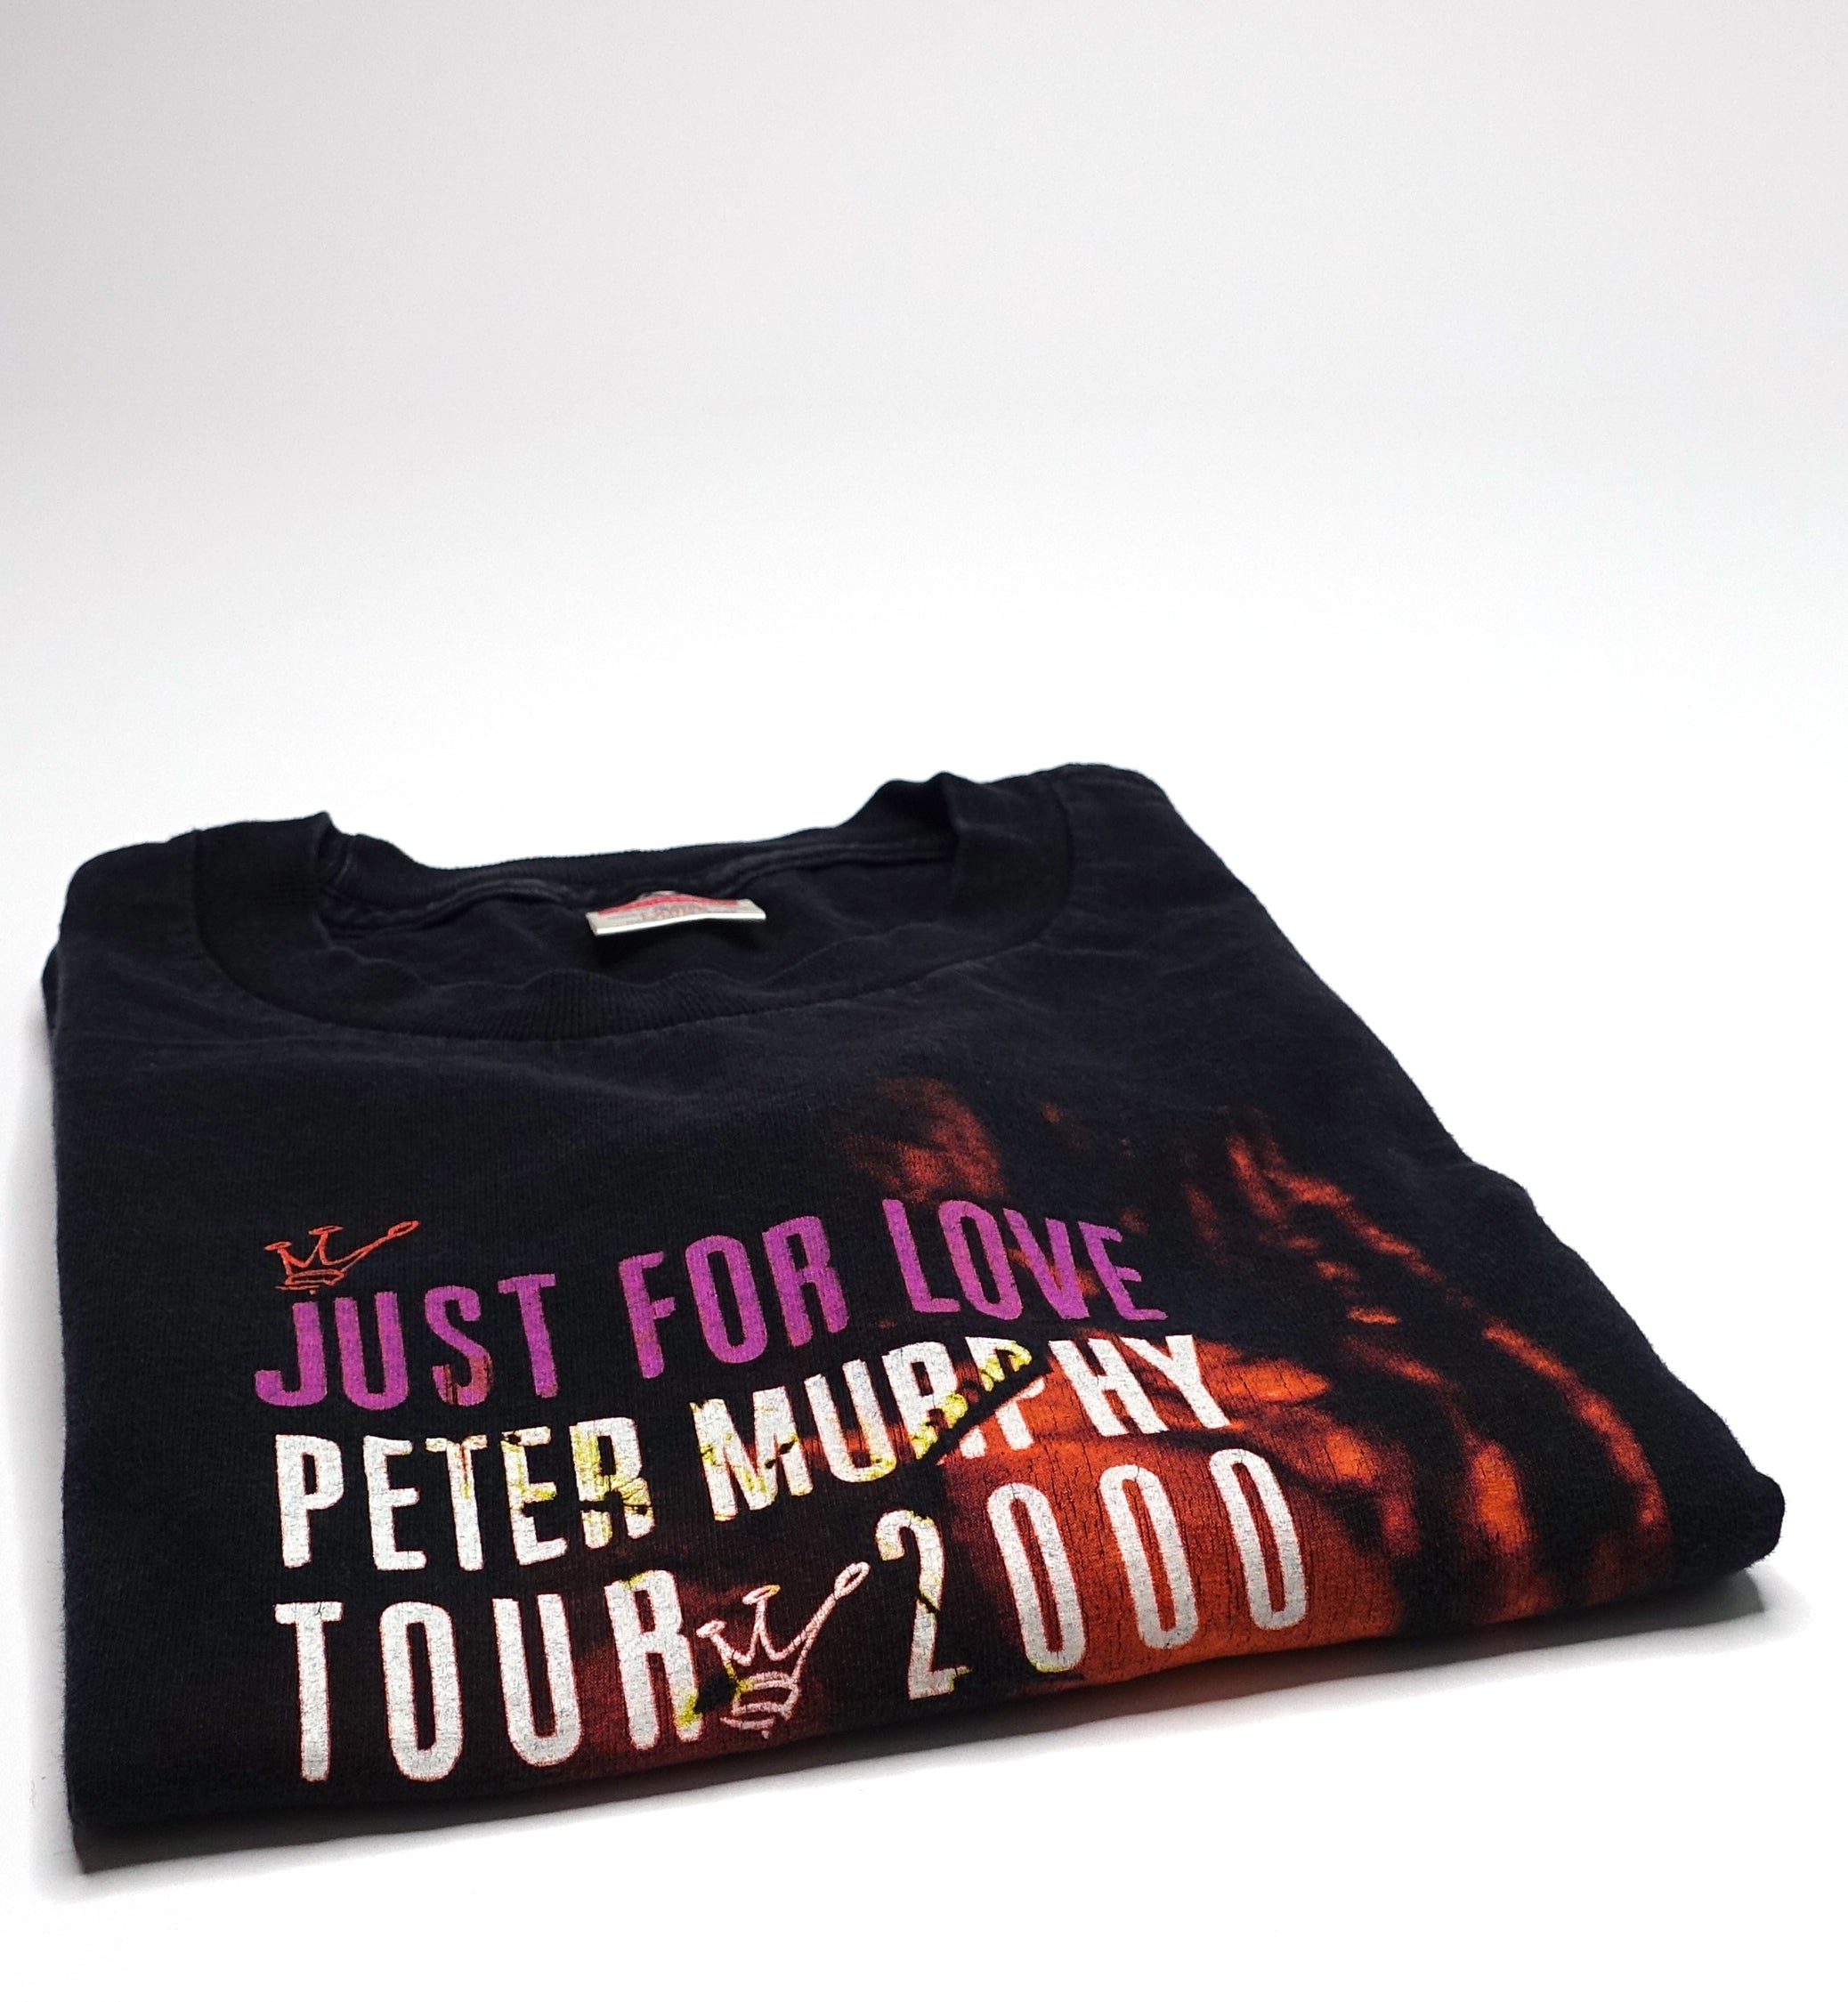 Peter Murphy - Just For Love 2000 Tour Long Sleeve Shirt Size Large